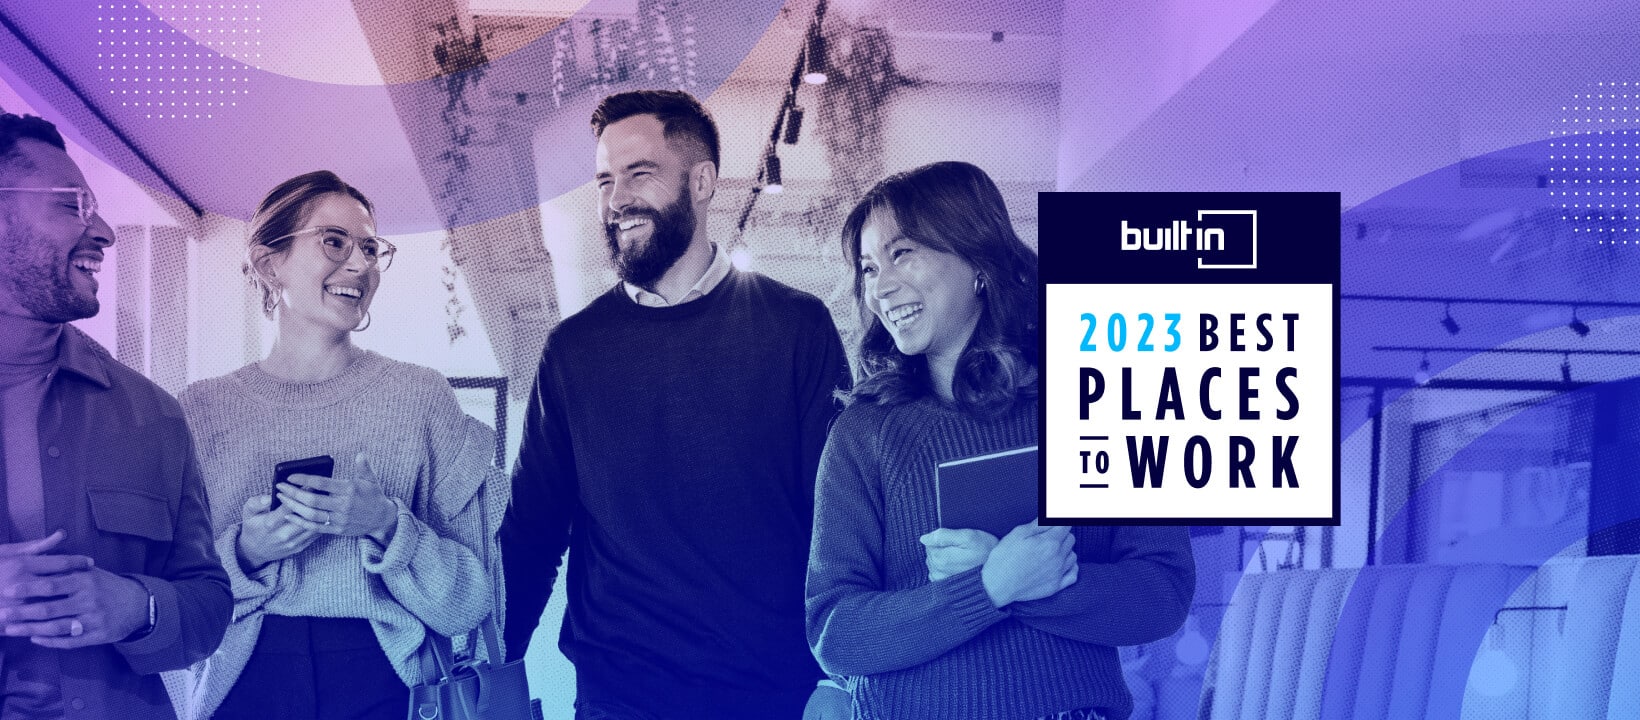 built in 2023 best places to work winner